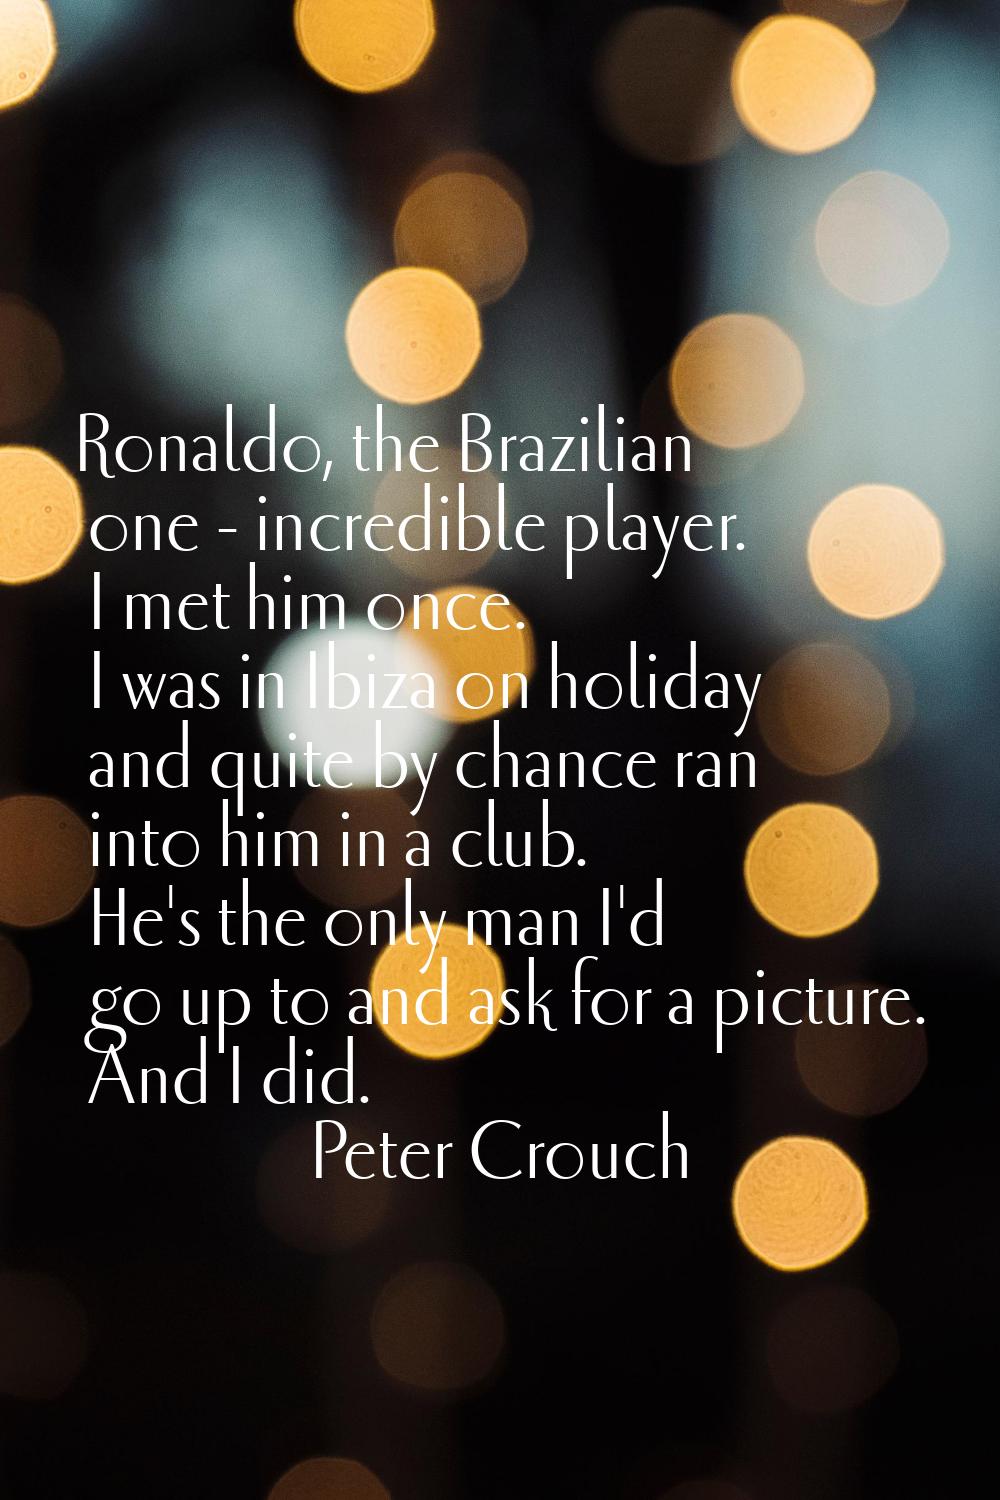 Ronaldo, the Brazilian one - incredible player. I met him once. I was in Ibiza on holiday and quite